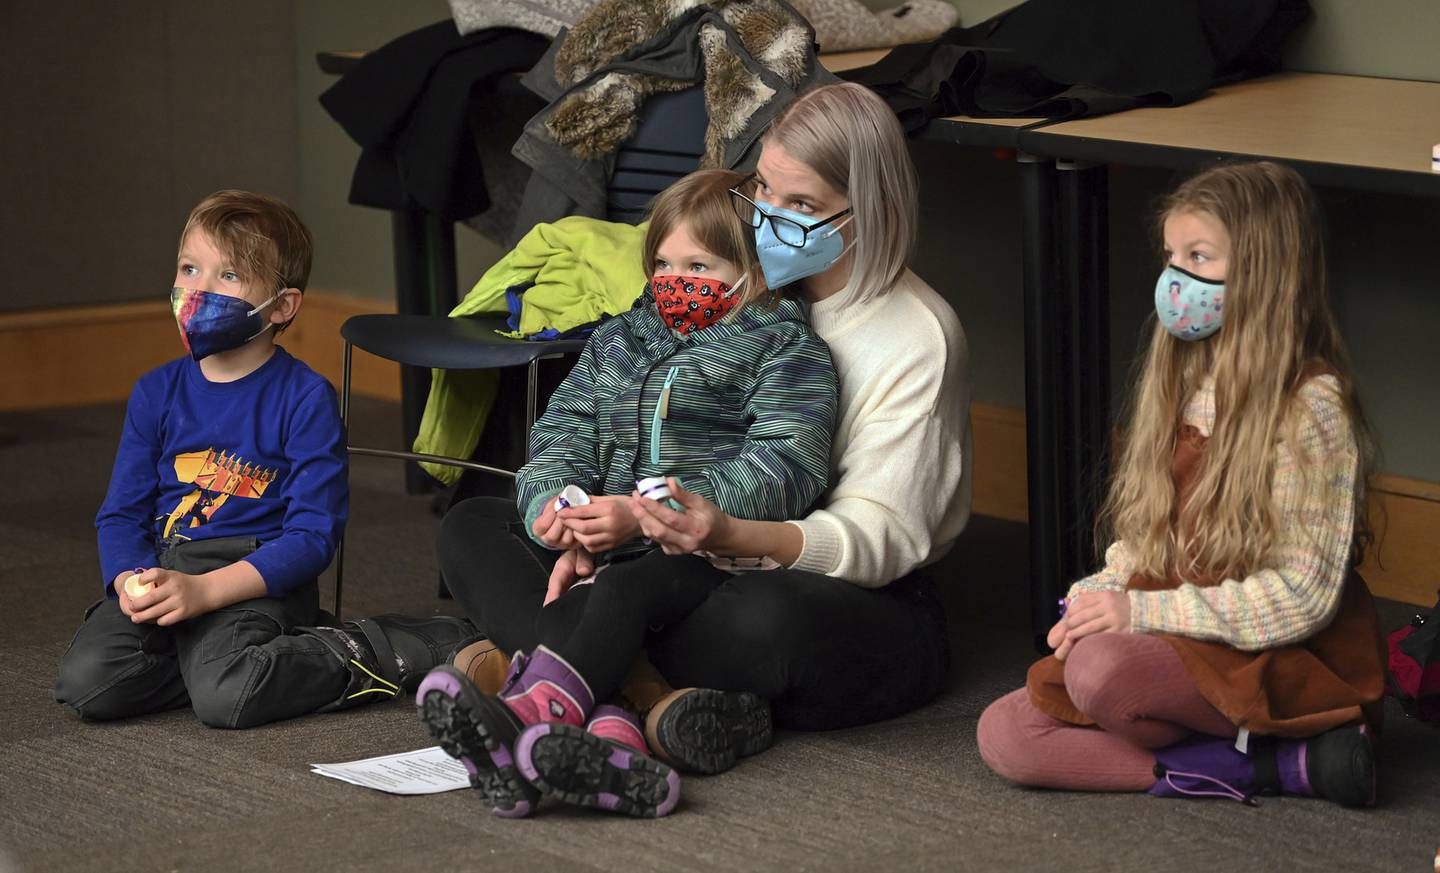 Seated in the audience are Christine Lensing of Waukegan and her children, from right to left, Jazmine, 8, a third grader, Audrey, 7, a first grader, and Desmond, 5, a preschooler, at the Human Trafficking Awareness Candle Vigil on Jan. 30, 2023 at the Waukegan Public Library in the Ray Bradbury Room.